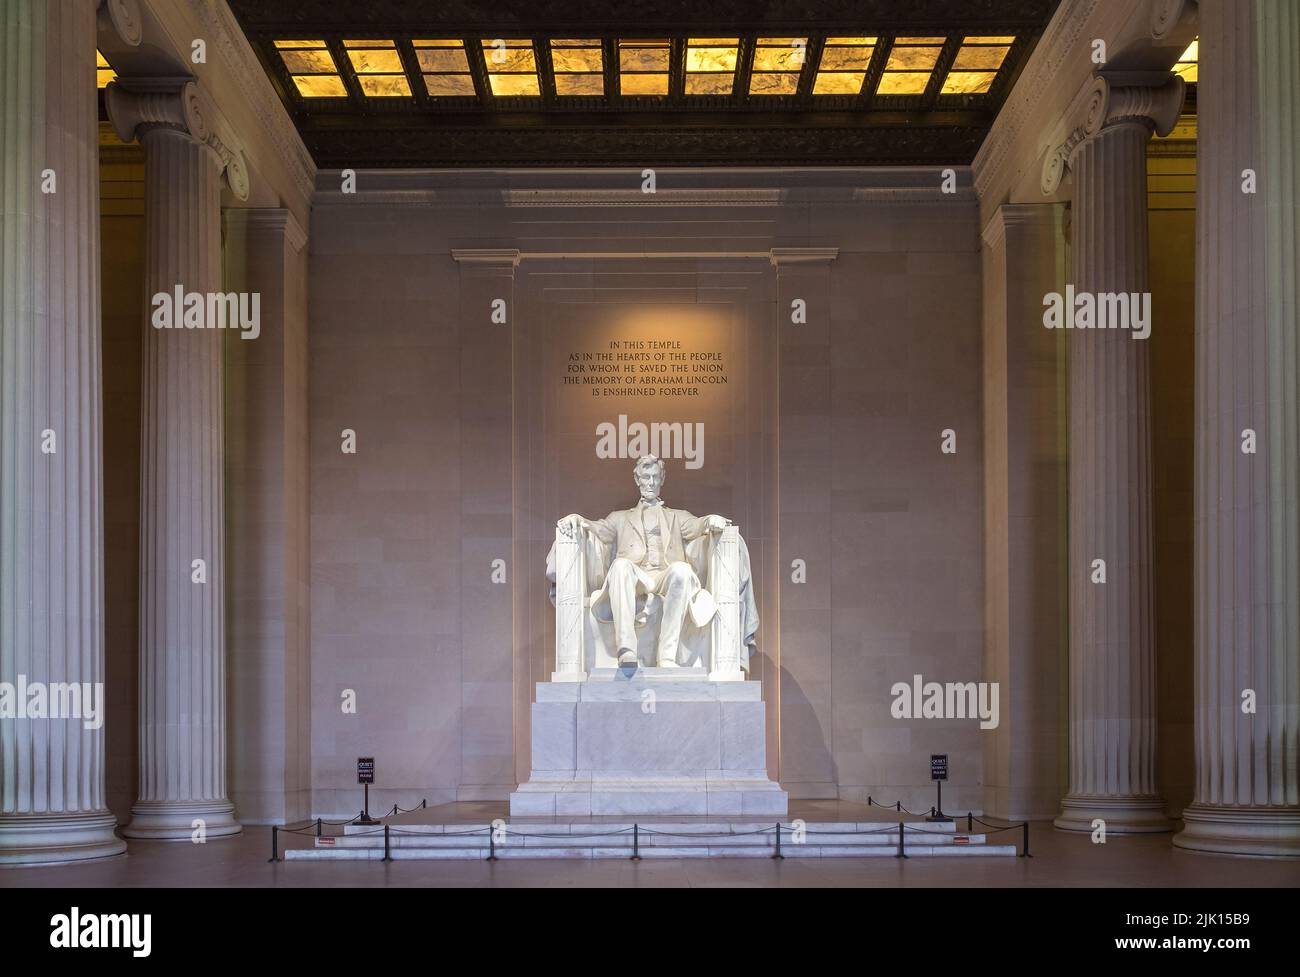 Interior of the Lincoln Memorial, National Mall, Washington DC, United States of America, North America Stock Photo